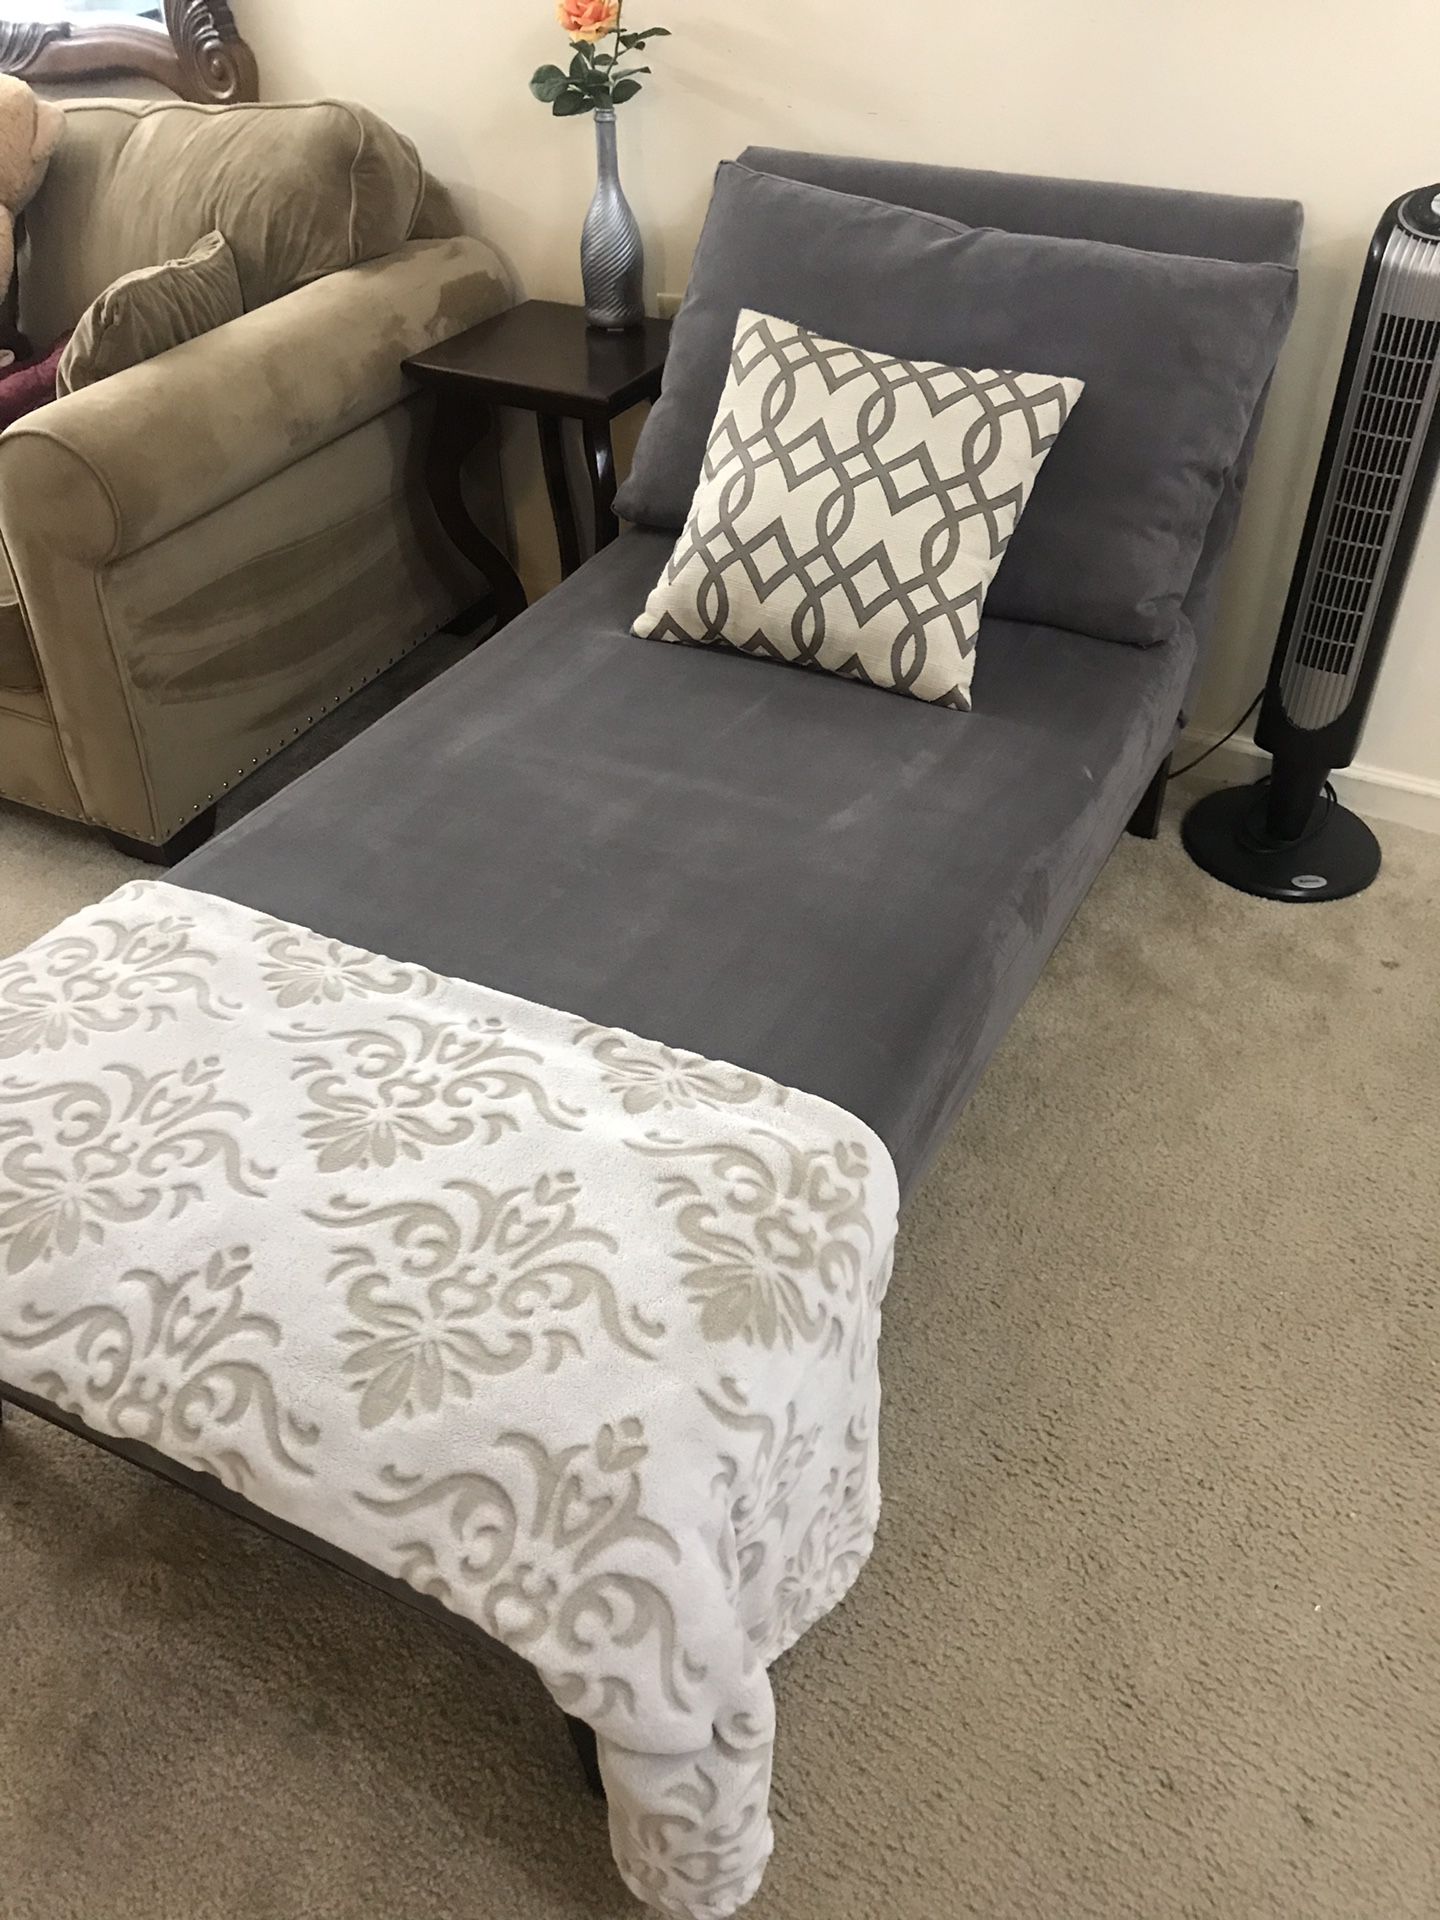 Gray chaise lounge chair